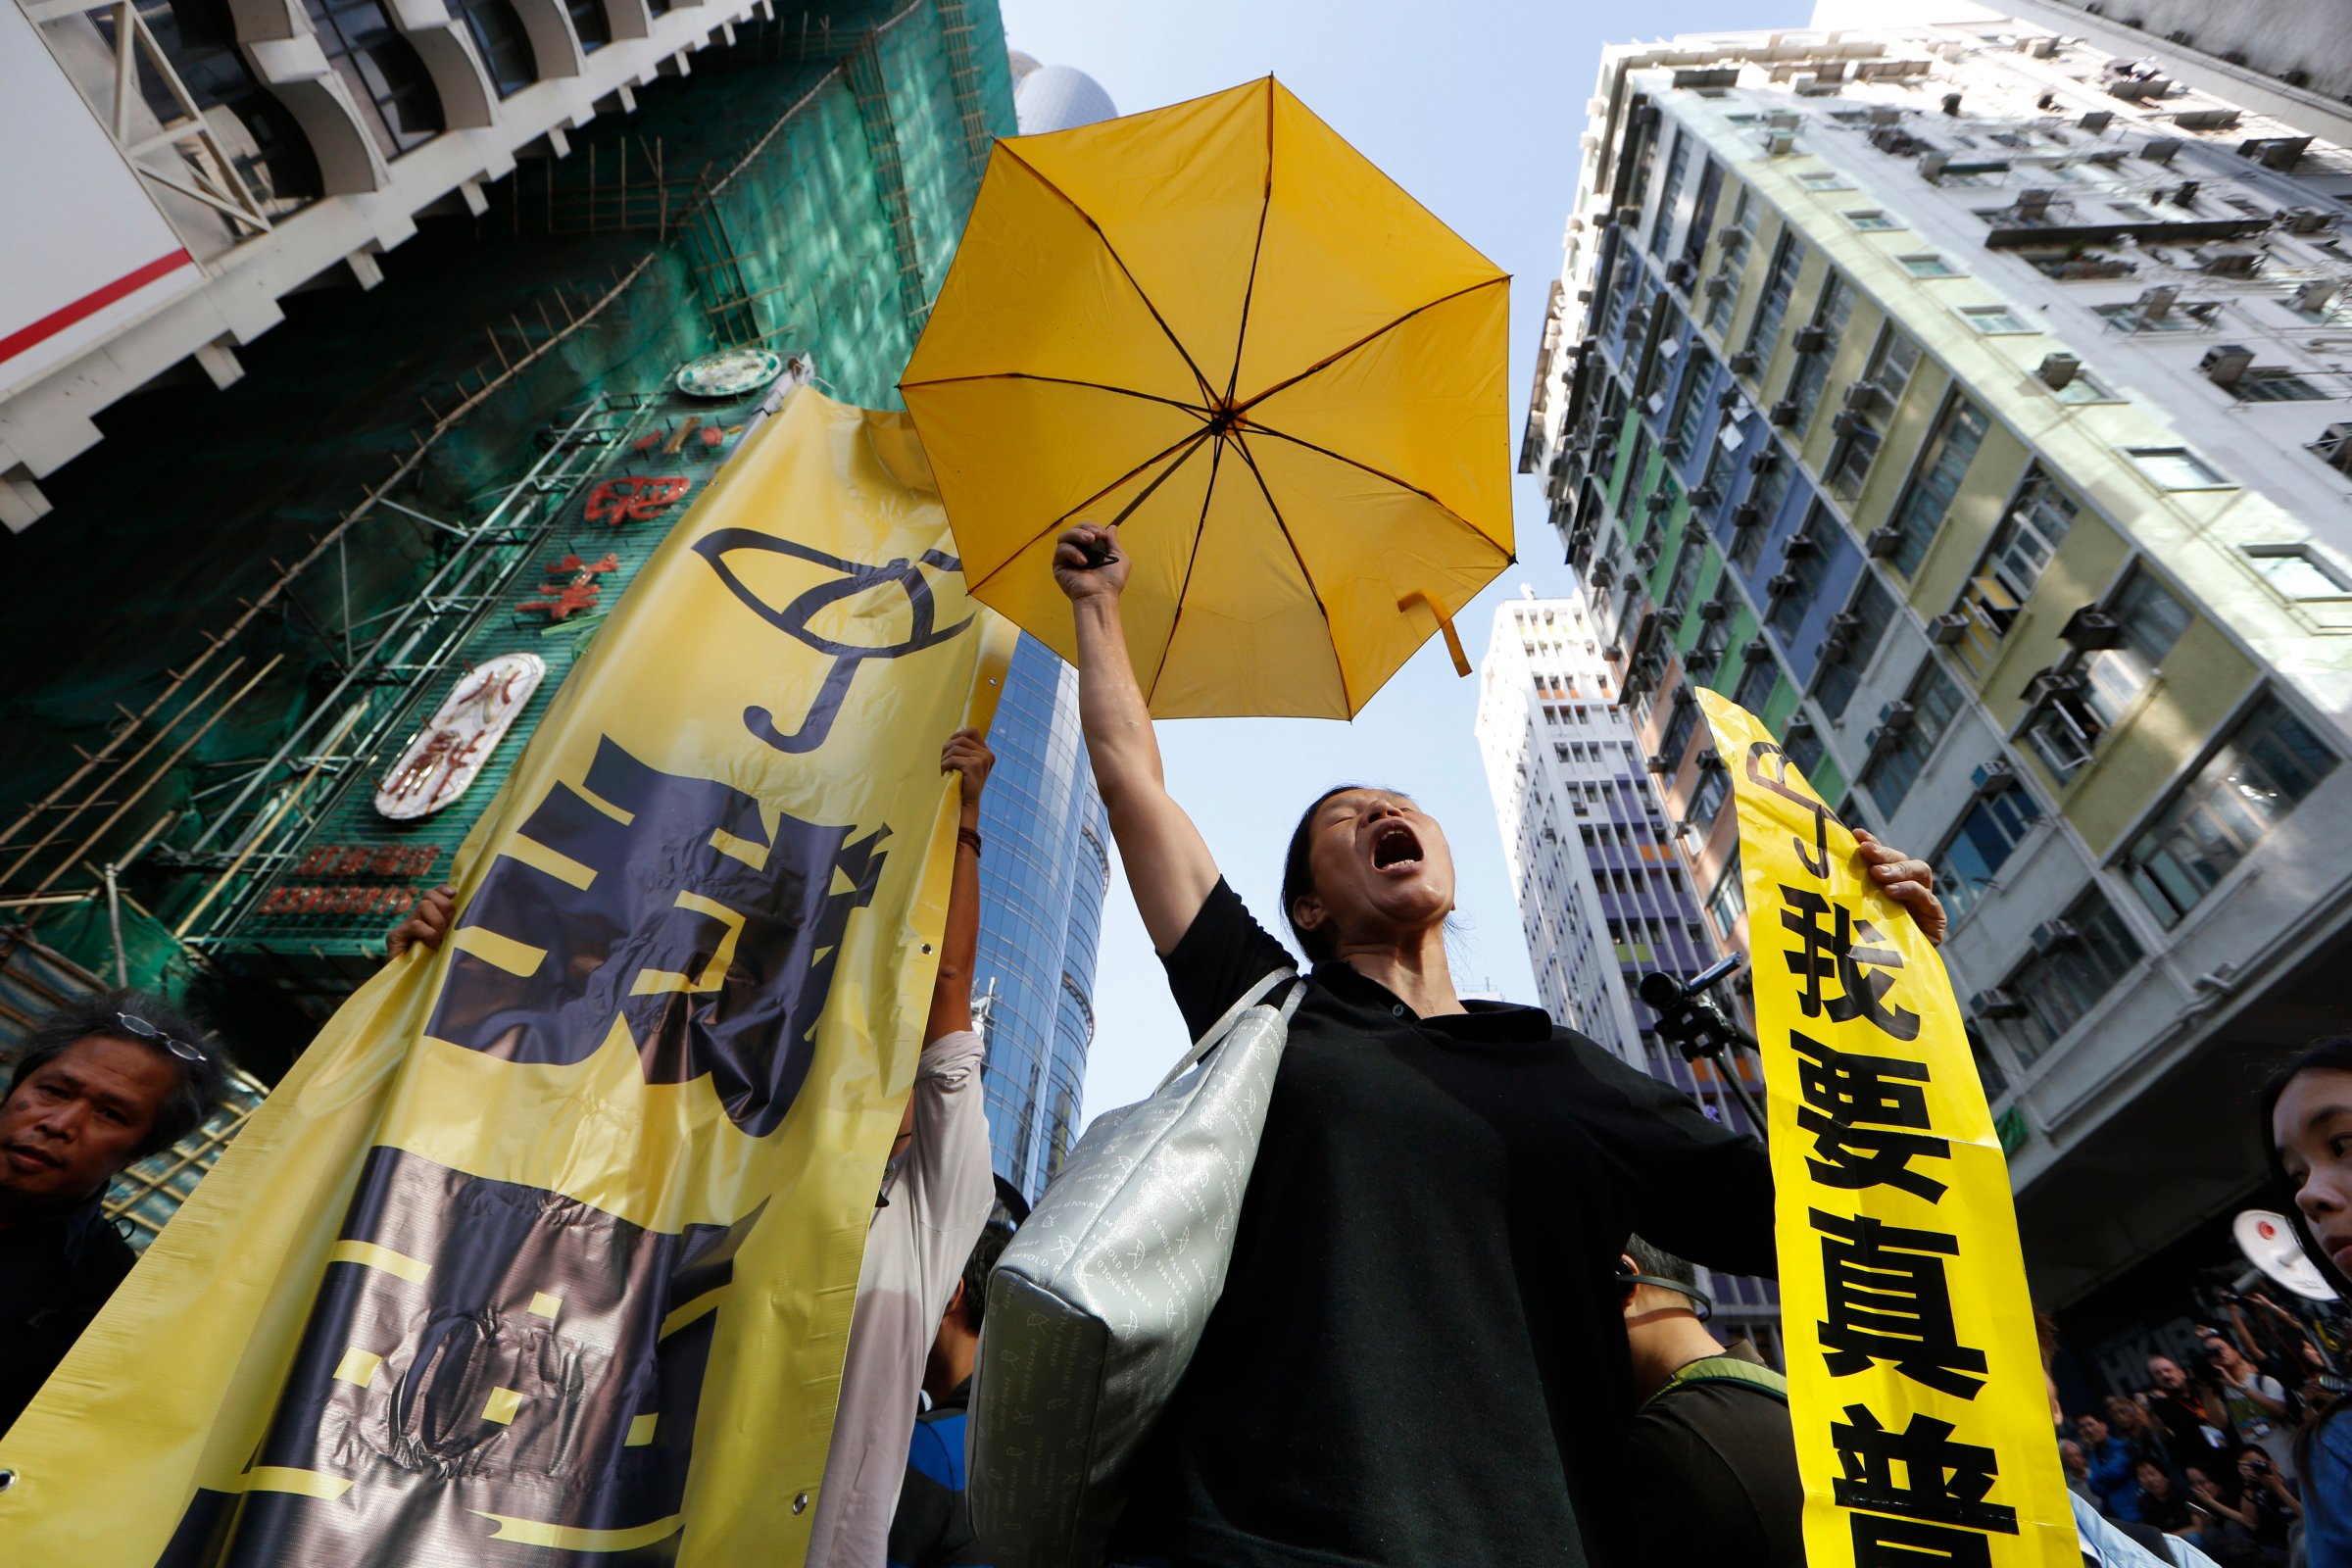 A pro-democracy protester chants at an occupied area before the barricade is removed in Mong Kok district of Hong Kong on Nov. 25, 2014.